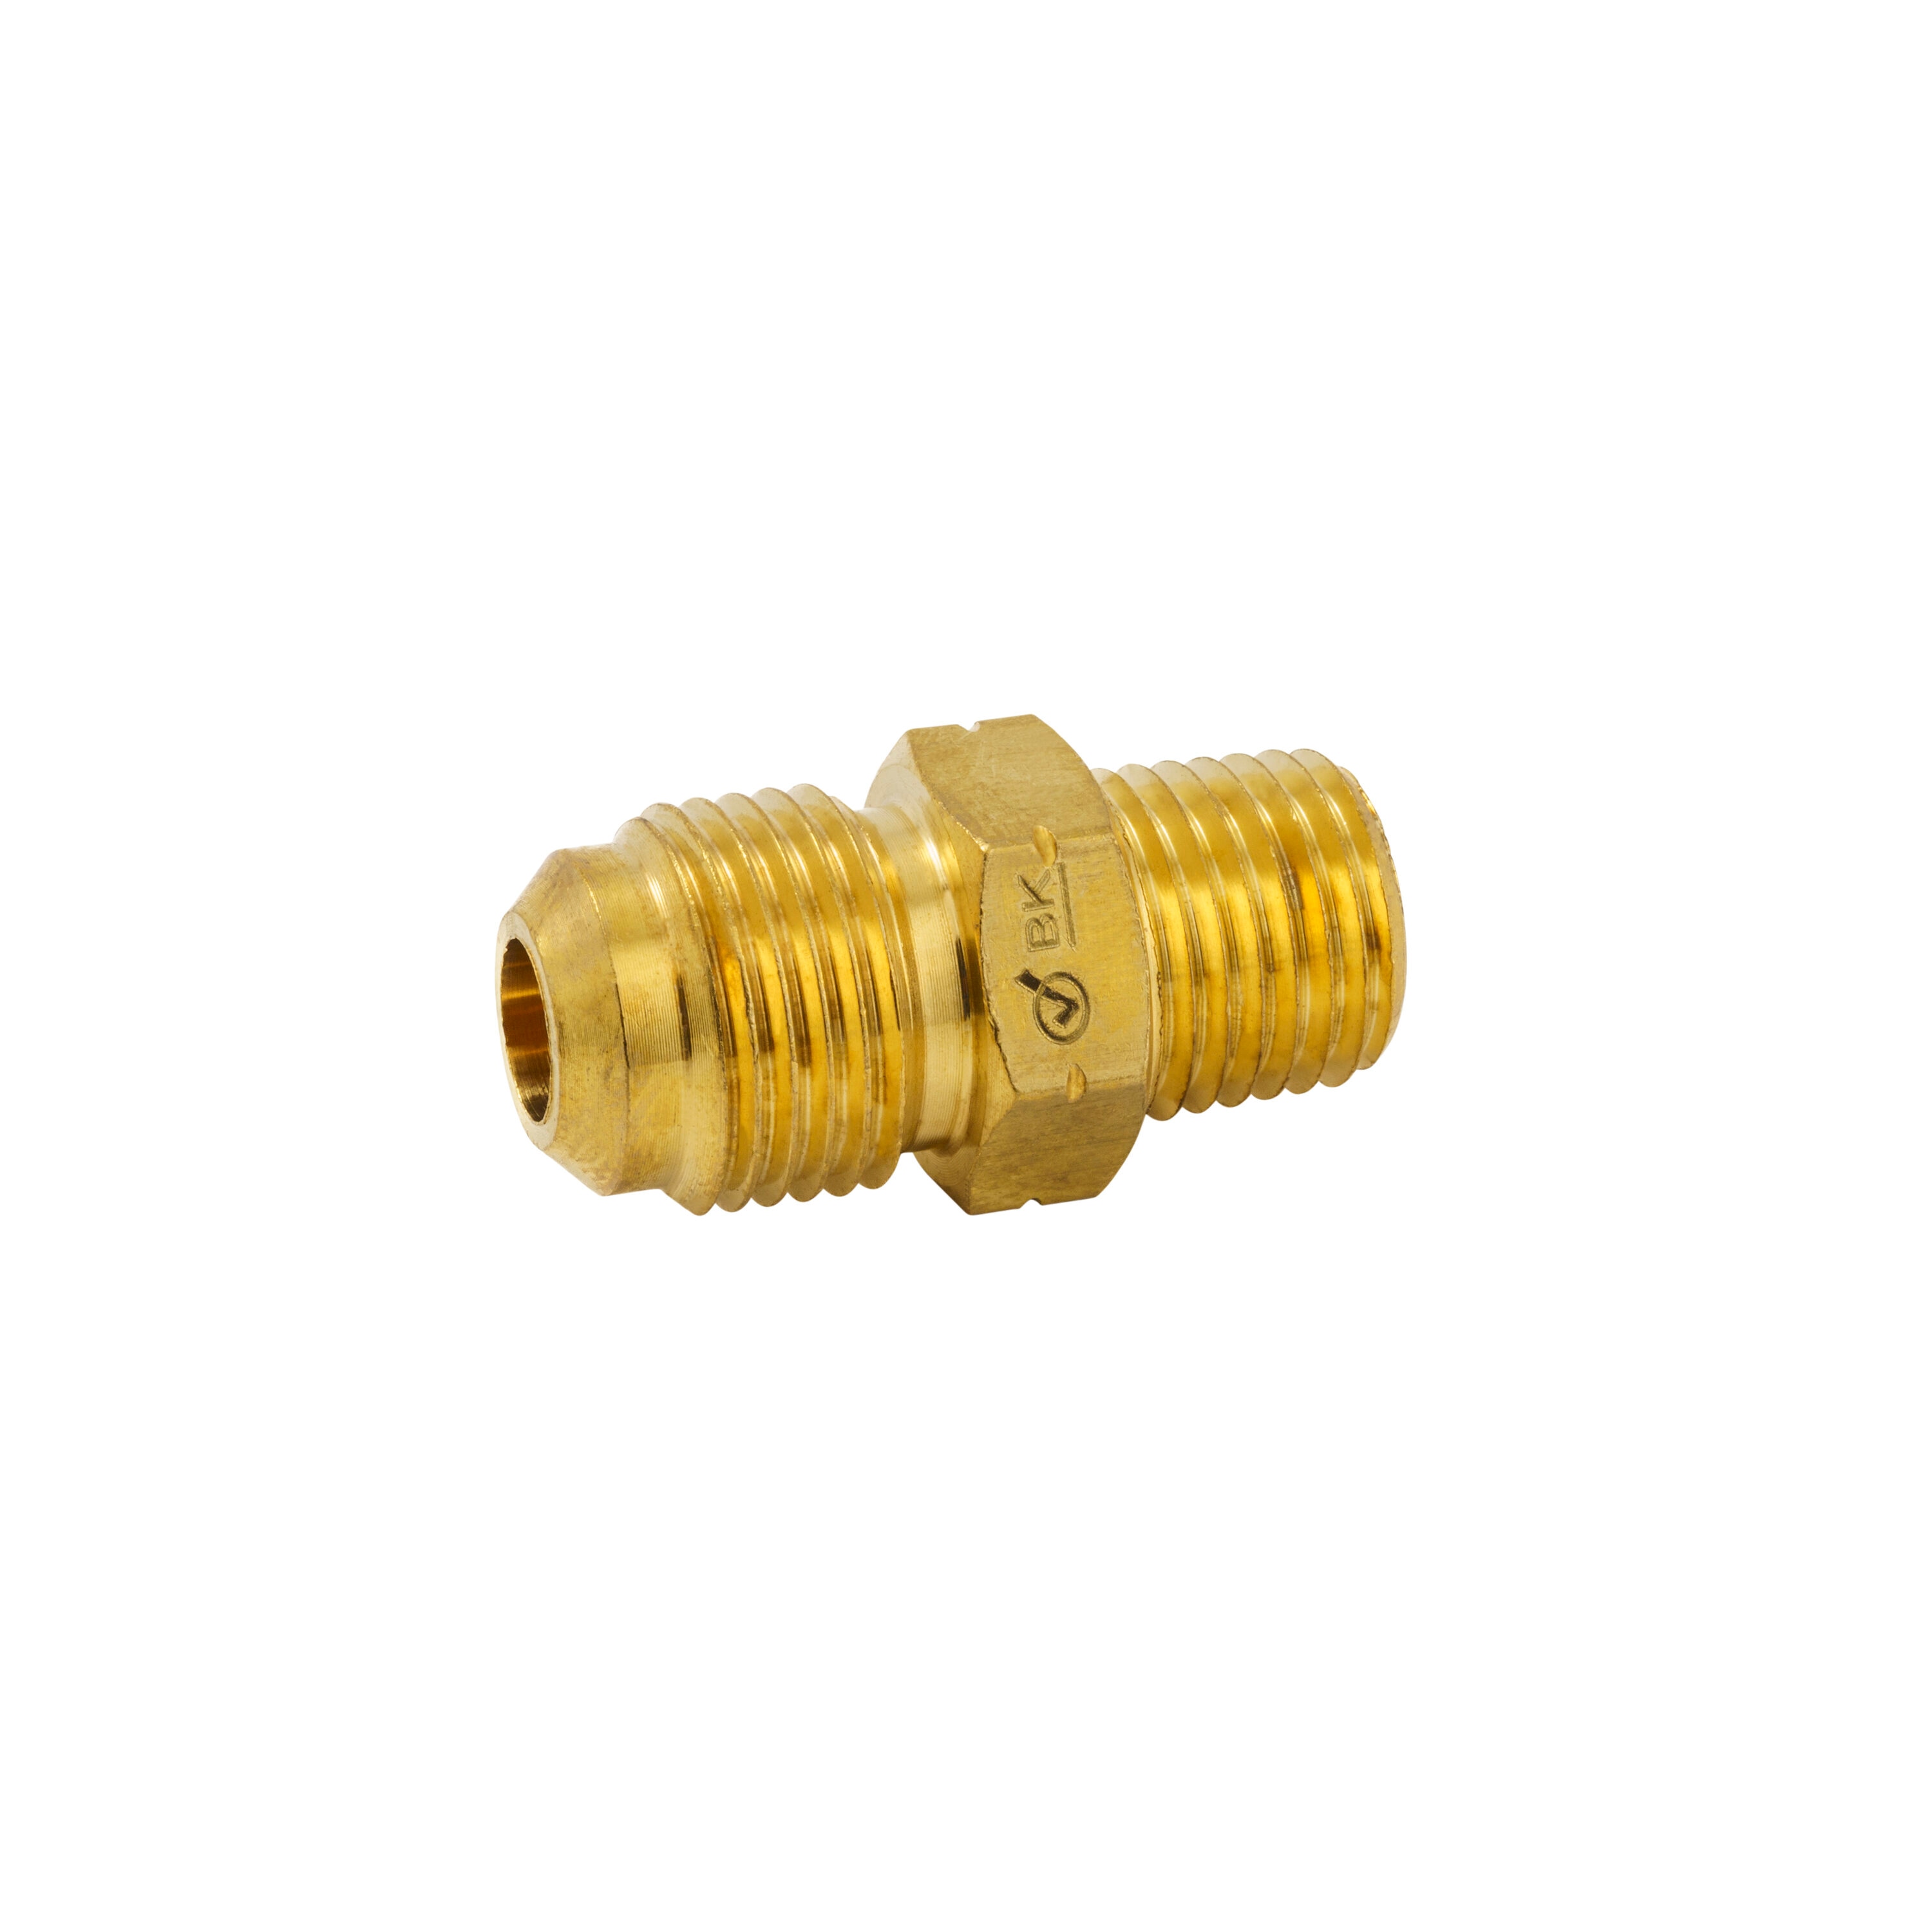 Proline Series 3/8-in x 1/4-in Threaded Union Fitting in Gold | FL-182B